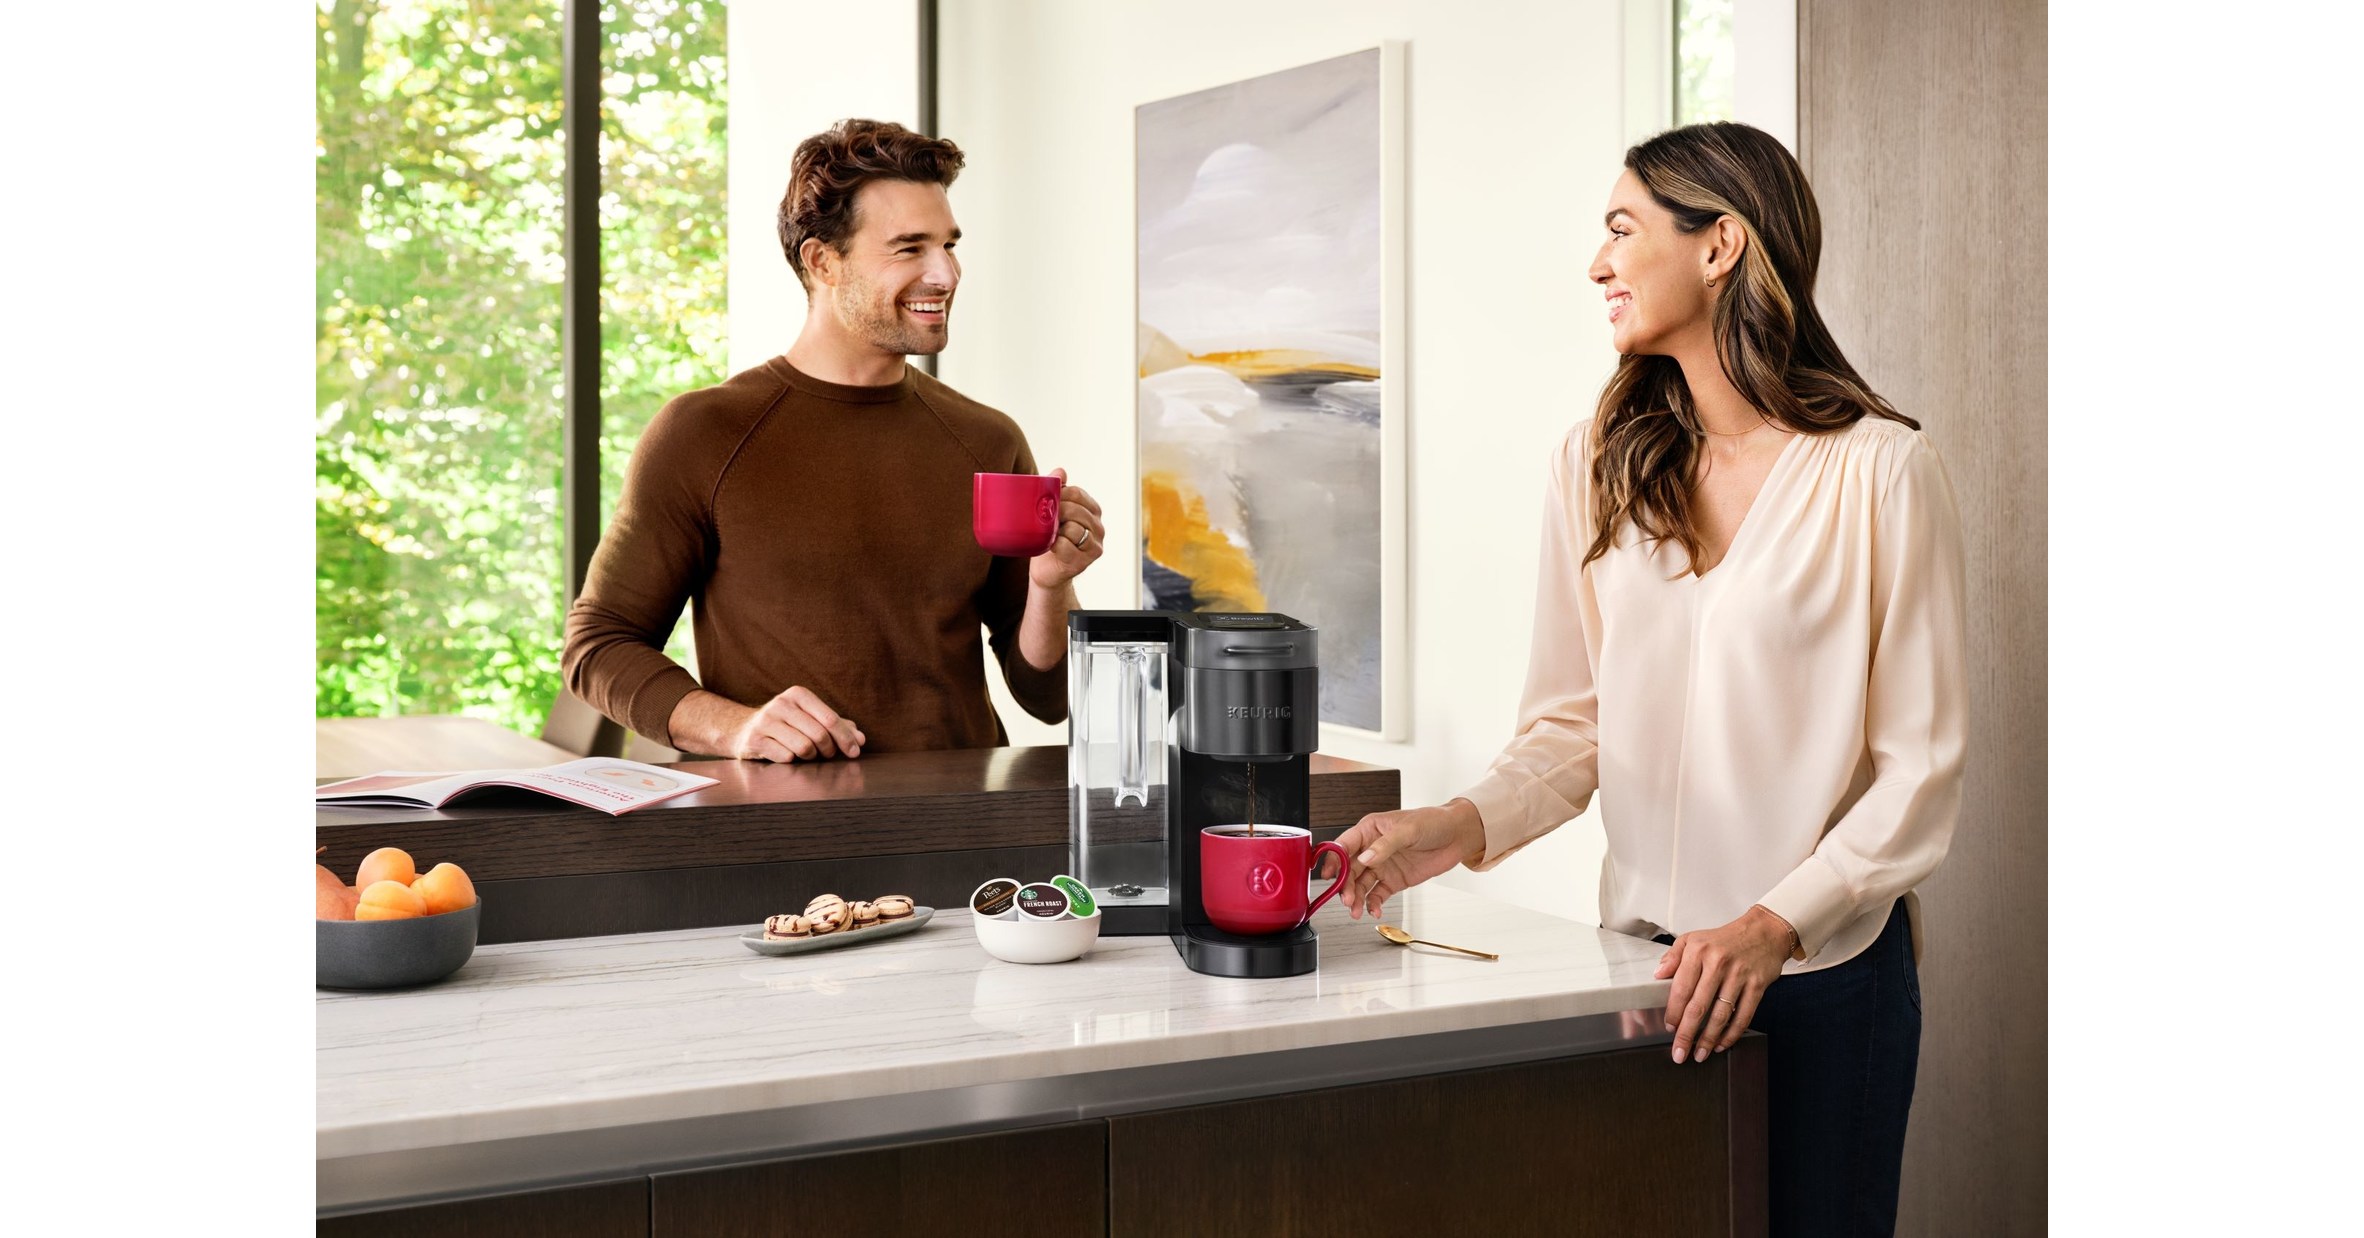 Keurig Introduces BrewID, the Company's New Connected Technology